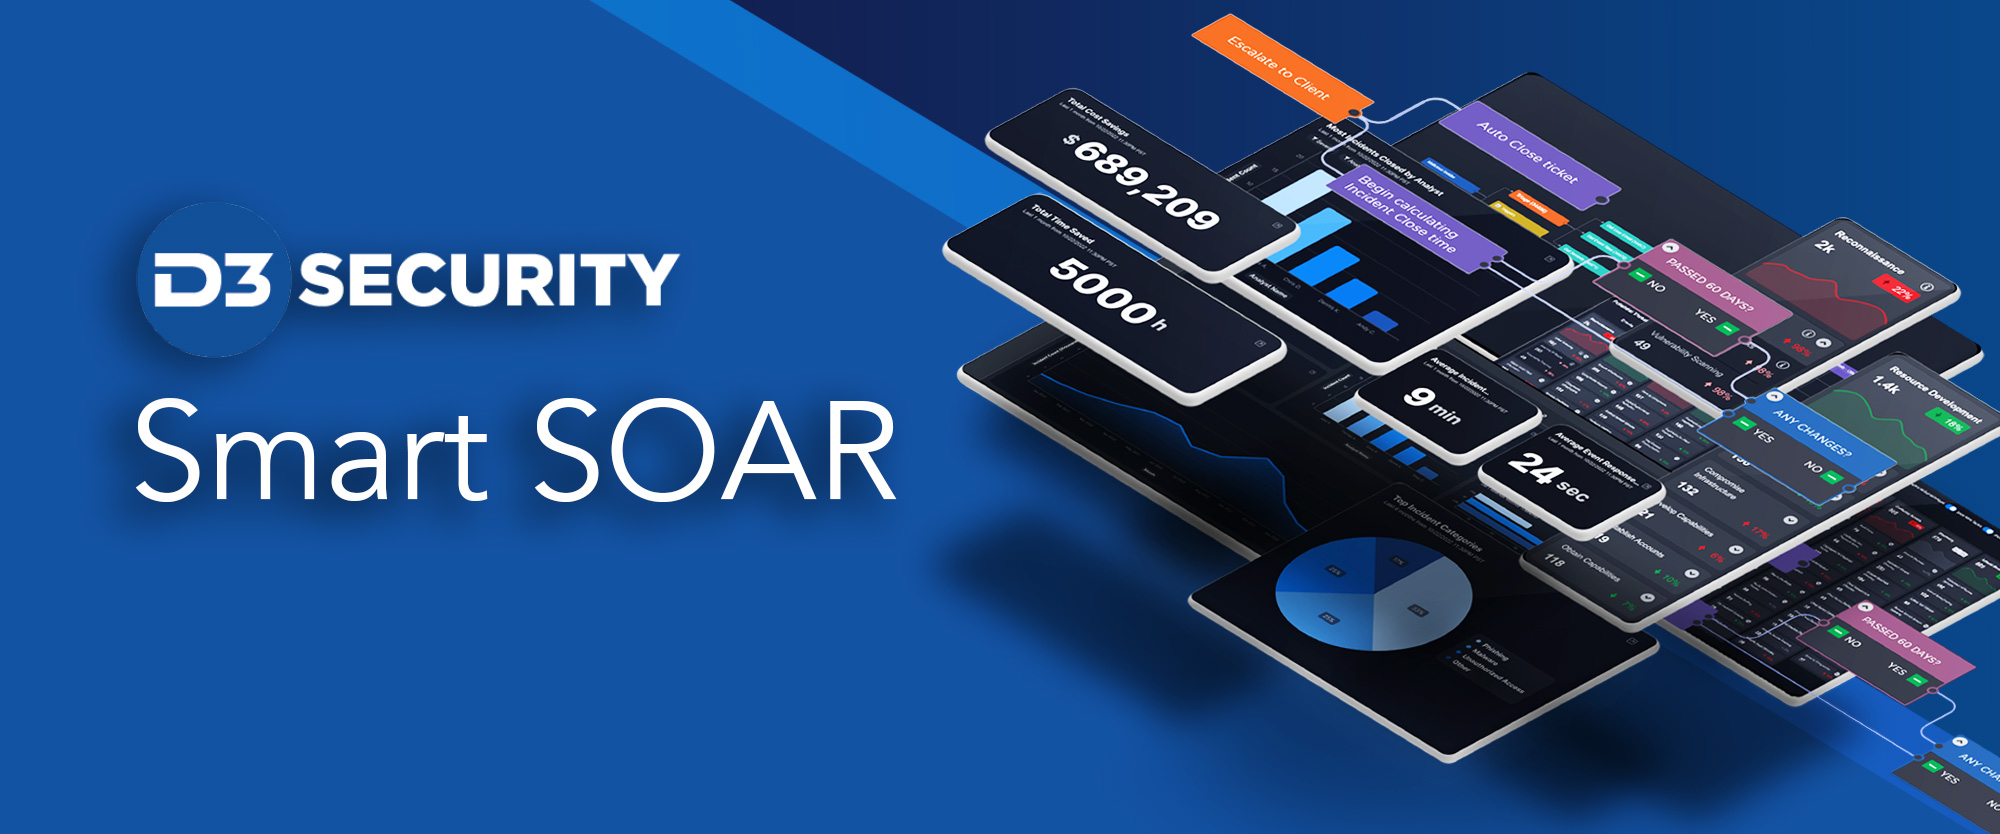 D3 Security Launches Smart SOAR™, Delivering Higher ROI, Faster Response & More Confidence